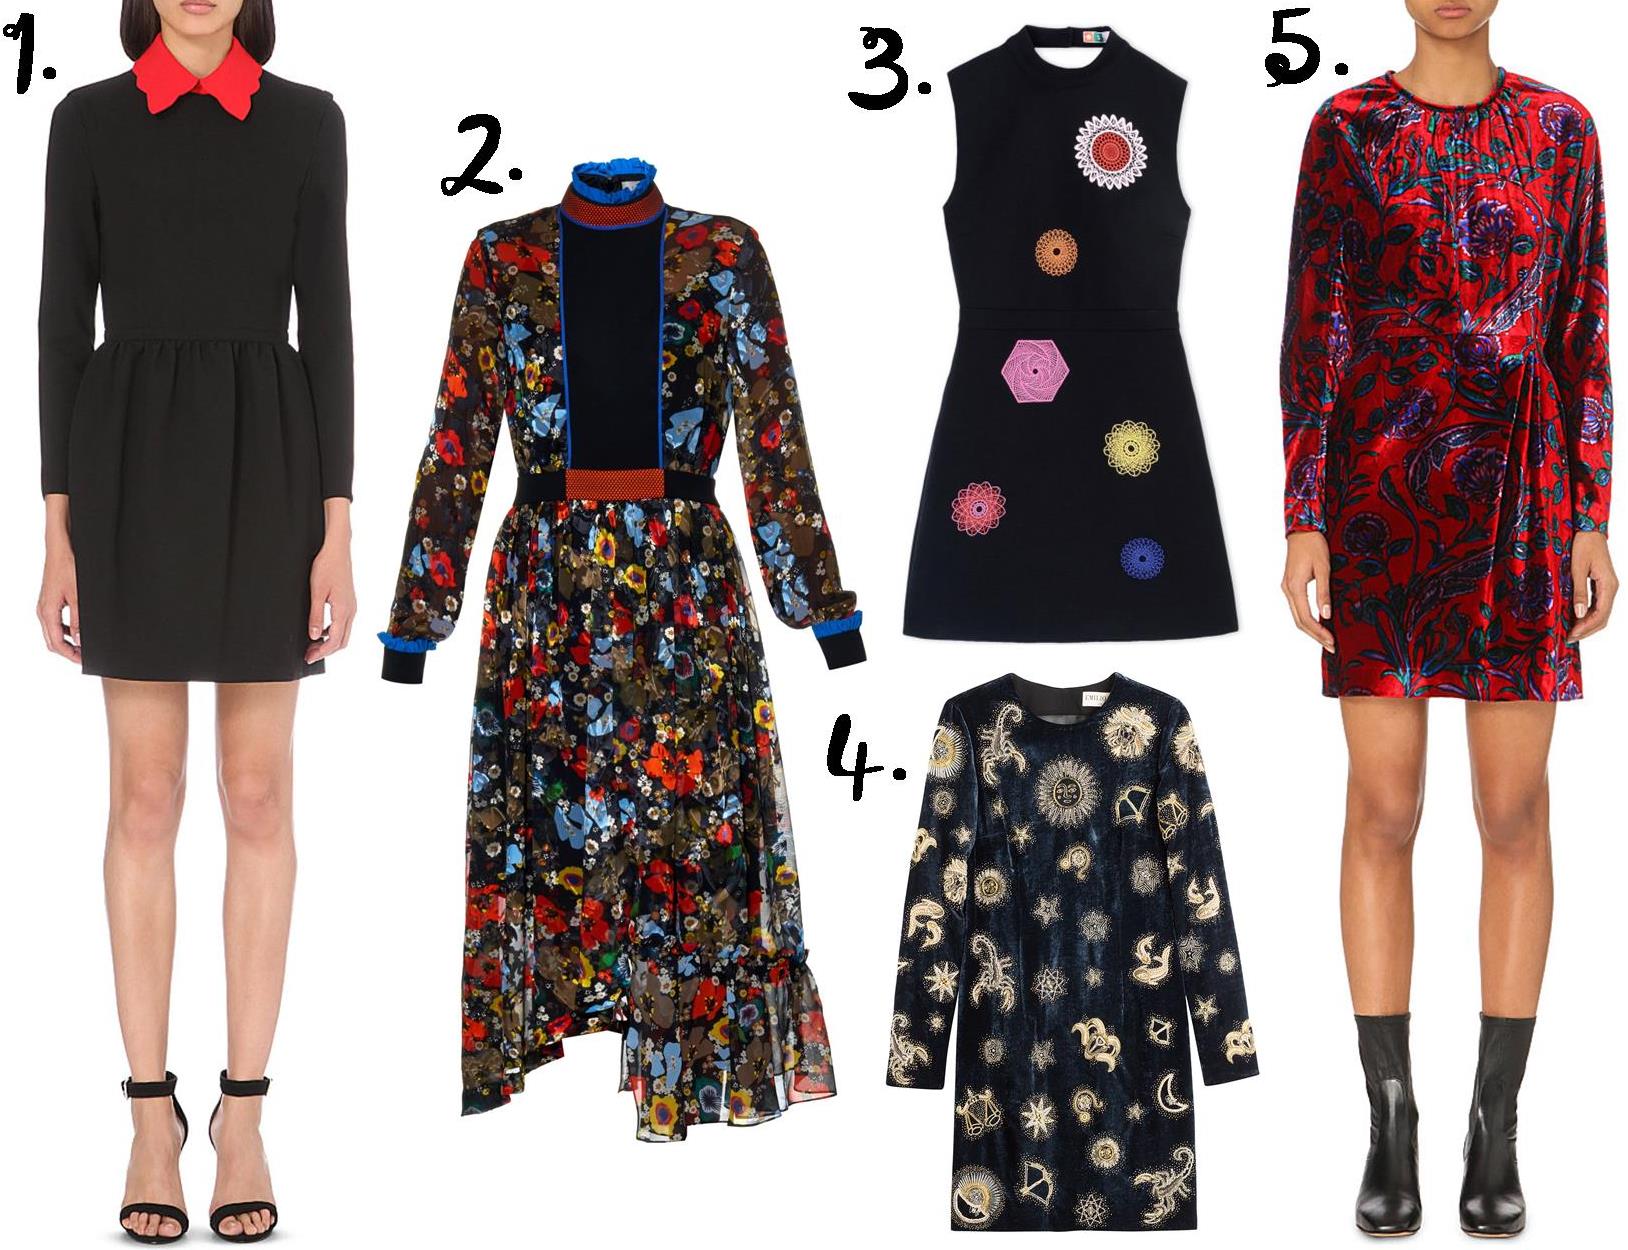 Dresses from Lyst